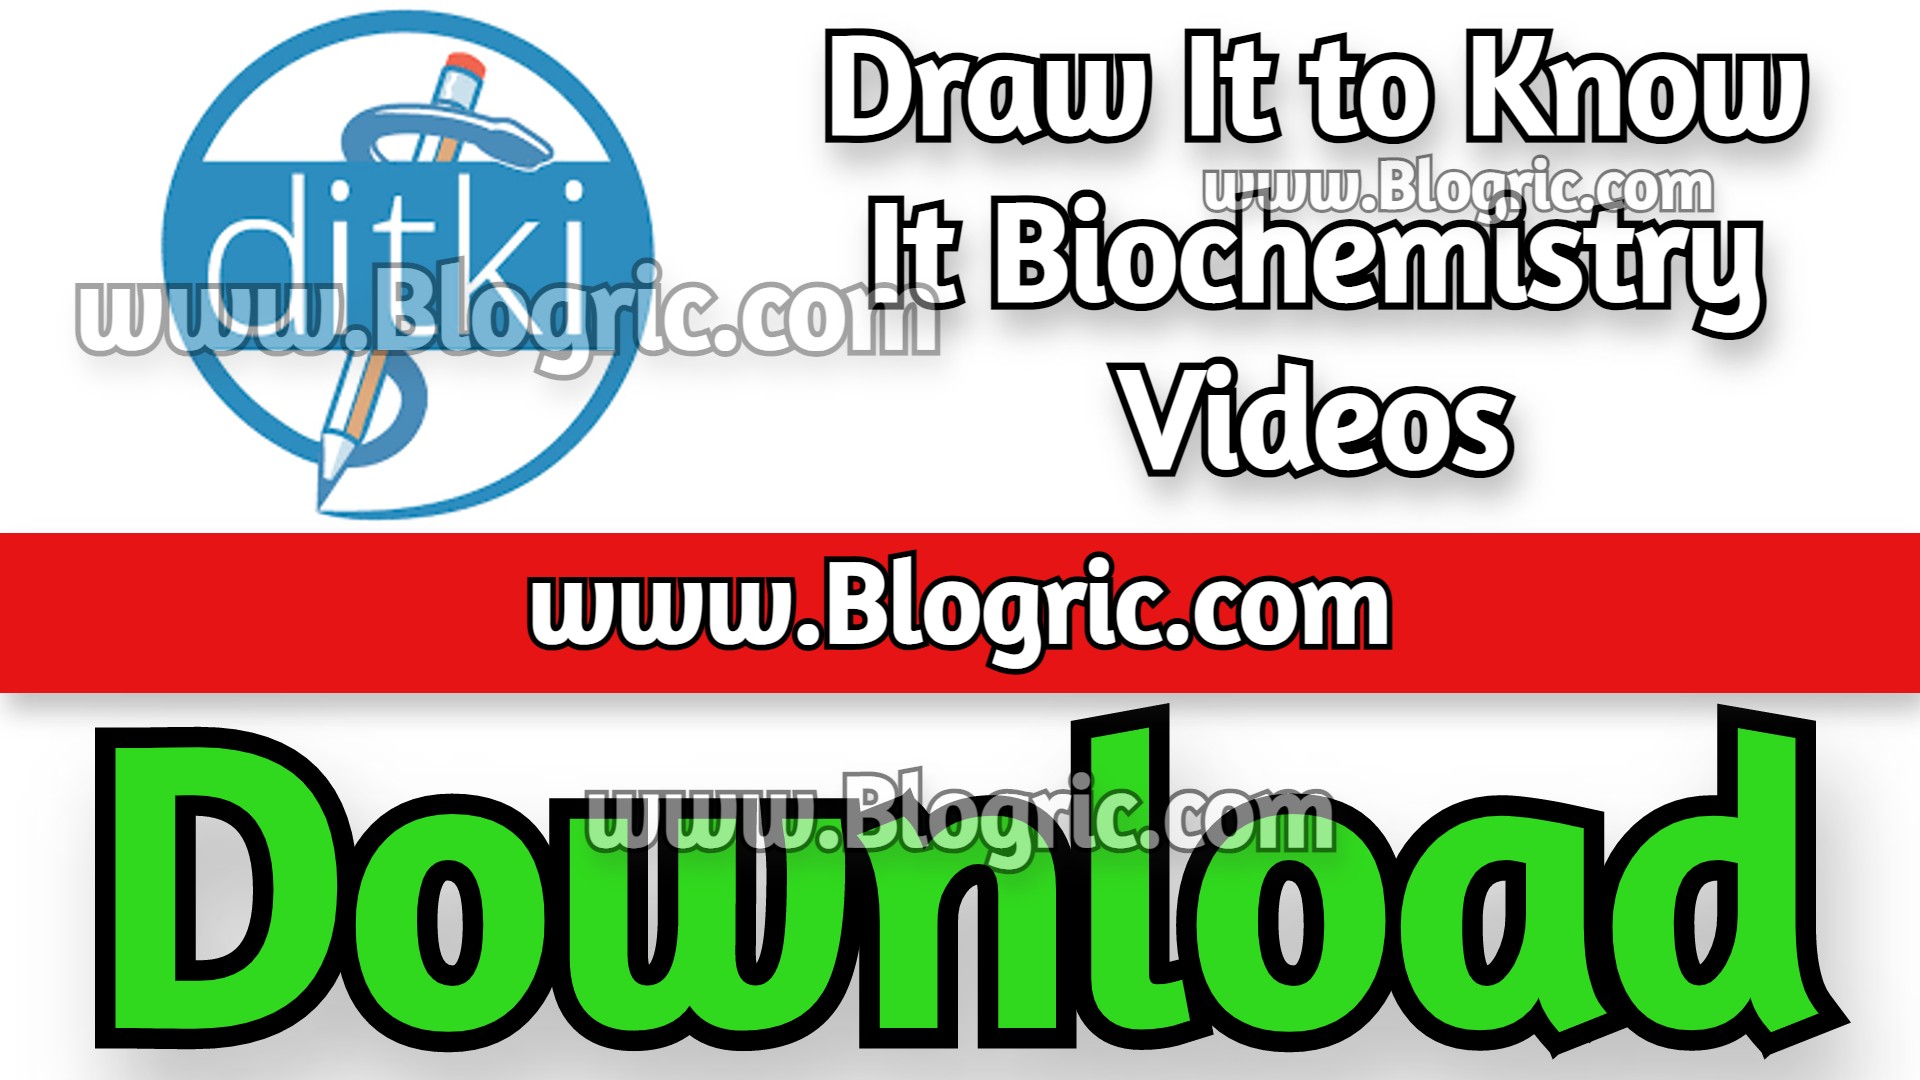 Draw It to Know It Microbiology videos 2022 : Download FREE